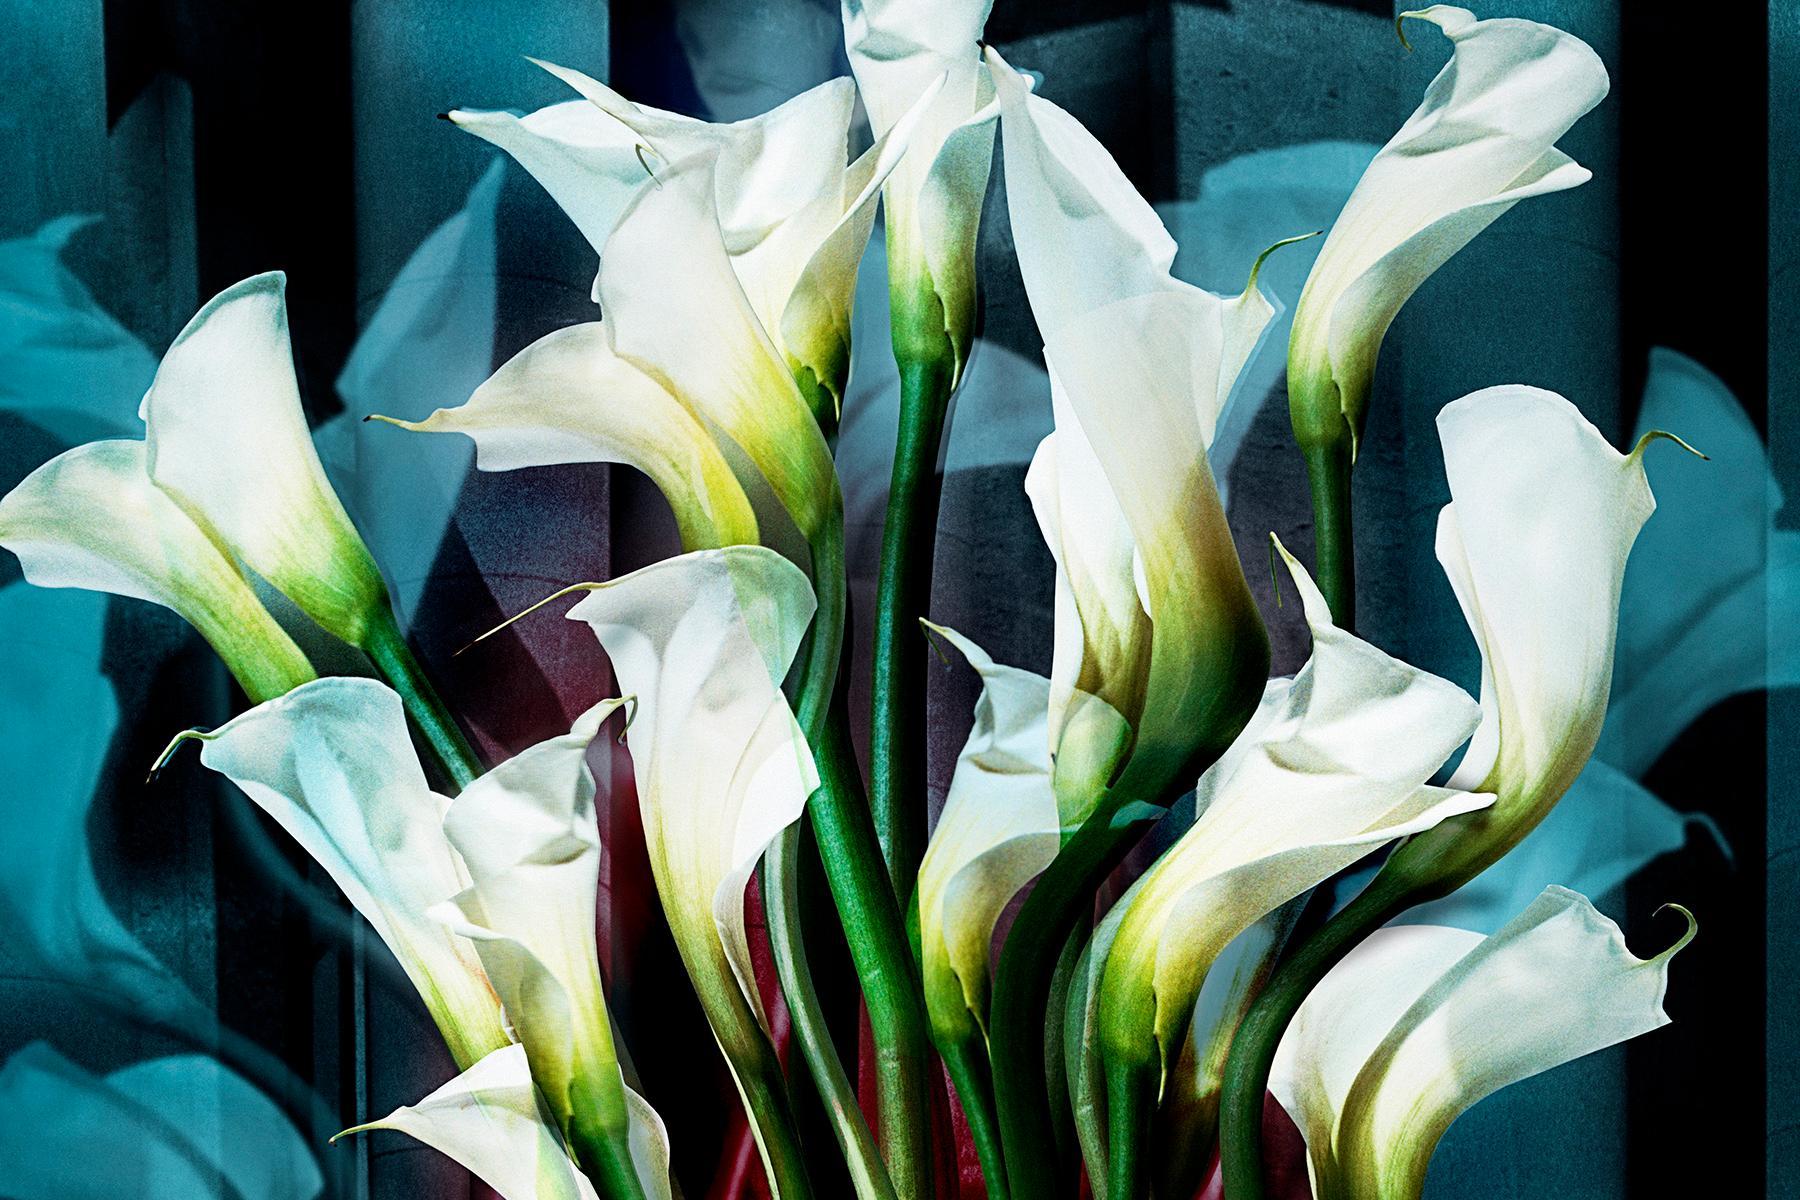 Calla Lilies • # 2 of 3 • 84 cm x 59 cm - Black Still-Life Photograph by Angelika Buettner